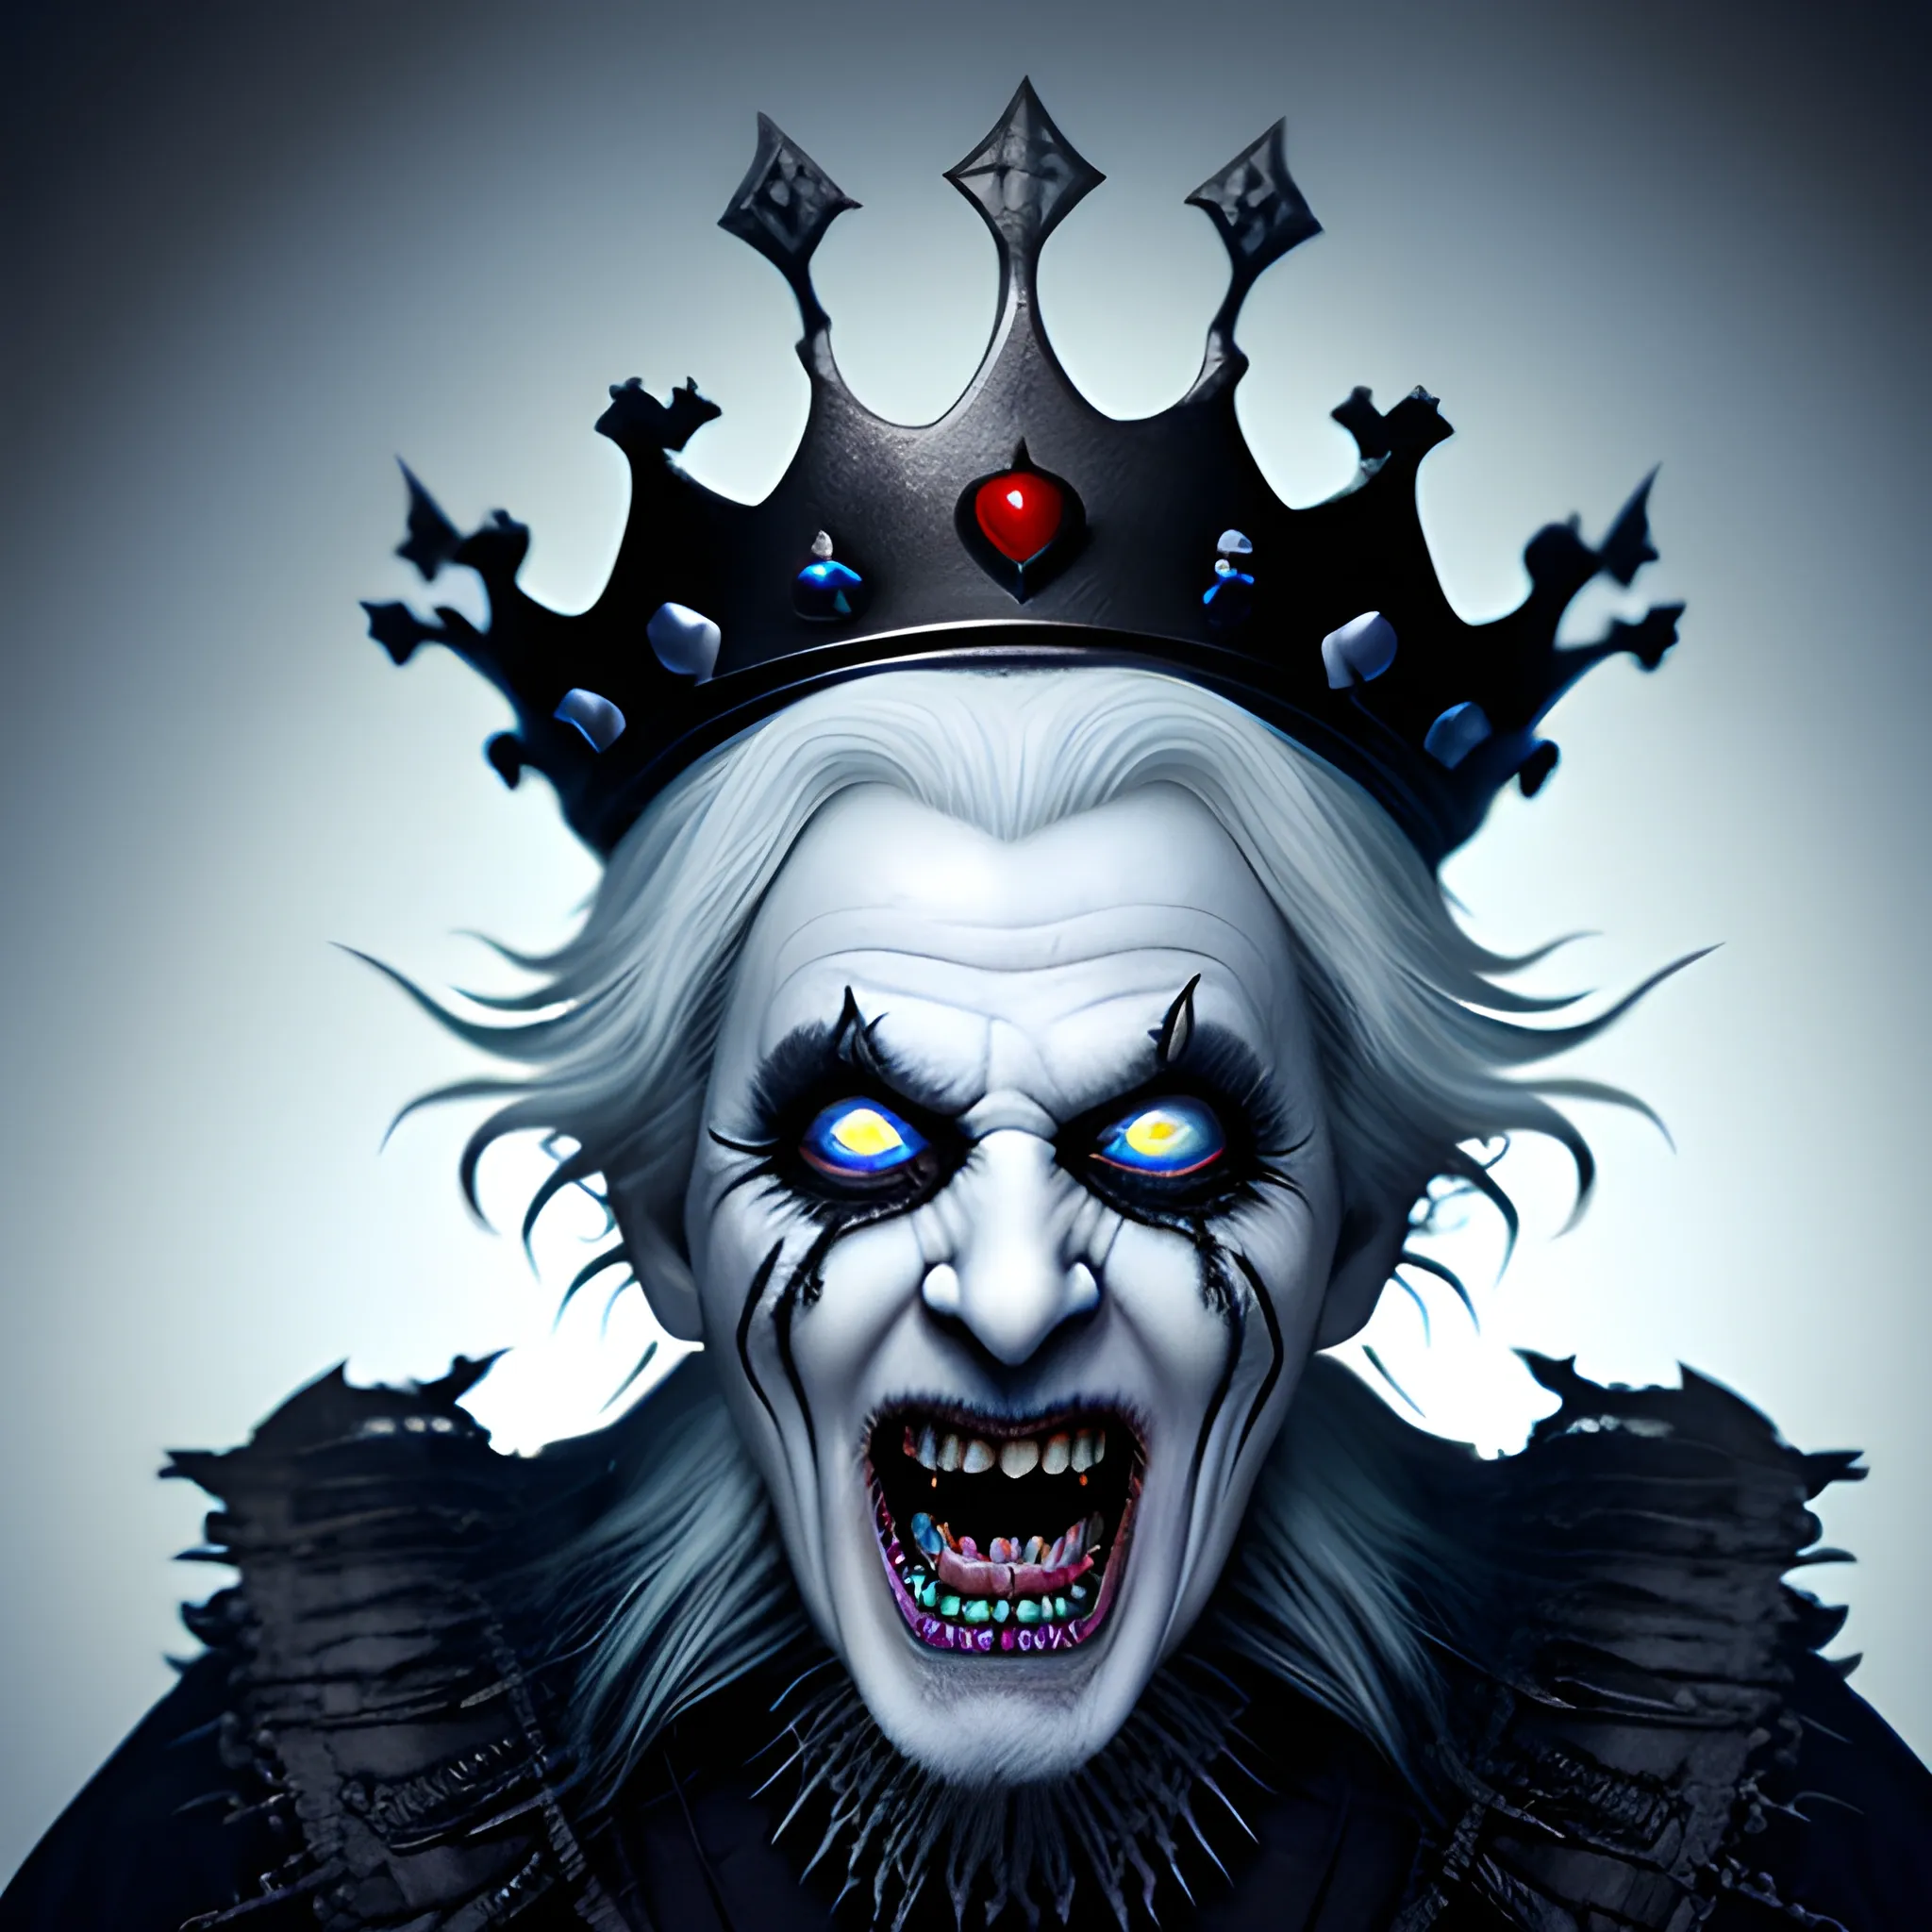 photorealistic image of the elderly king of ghosts screaming with a black crown, full body, ominous smile, dimmed lighting, blue painted hair, white makeup, evil grin, bokeh lighting